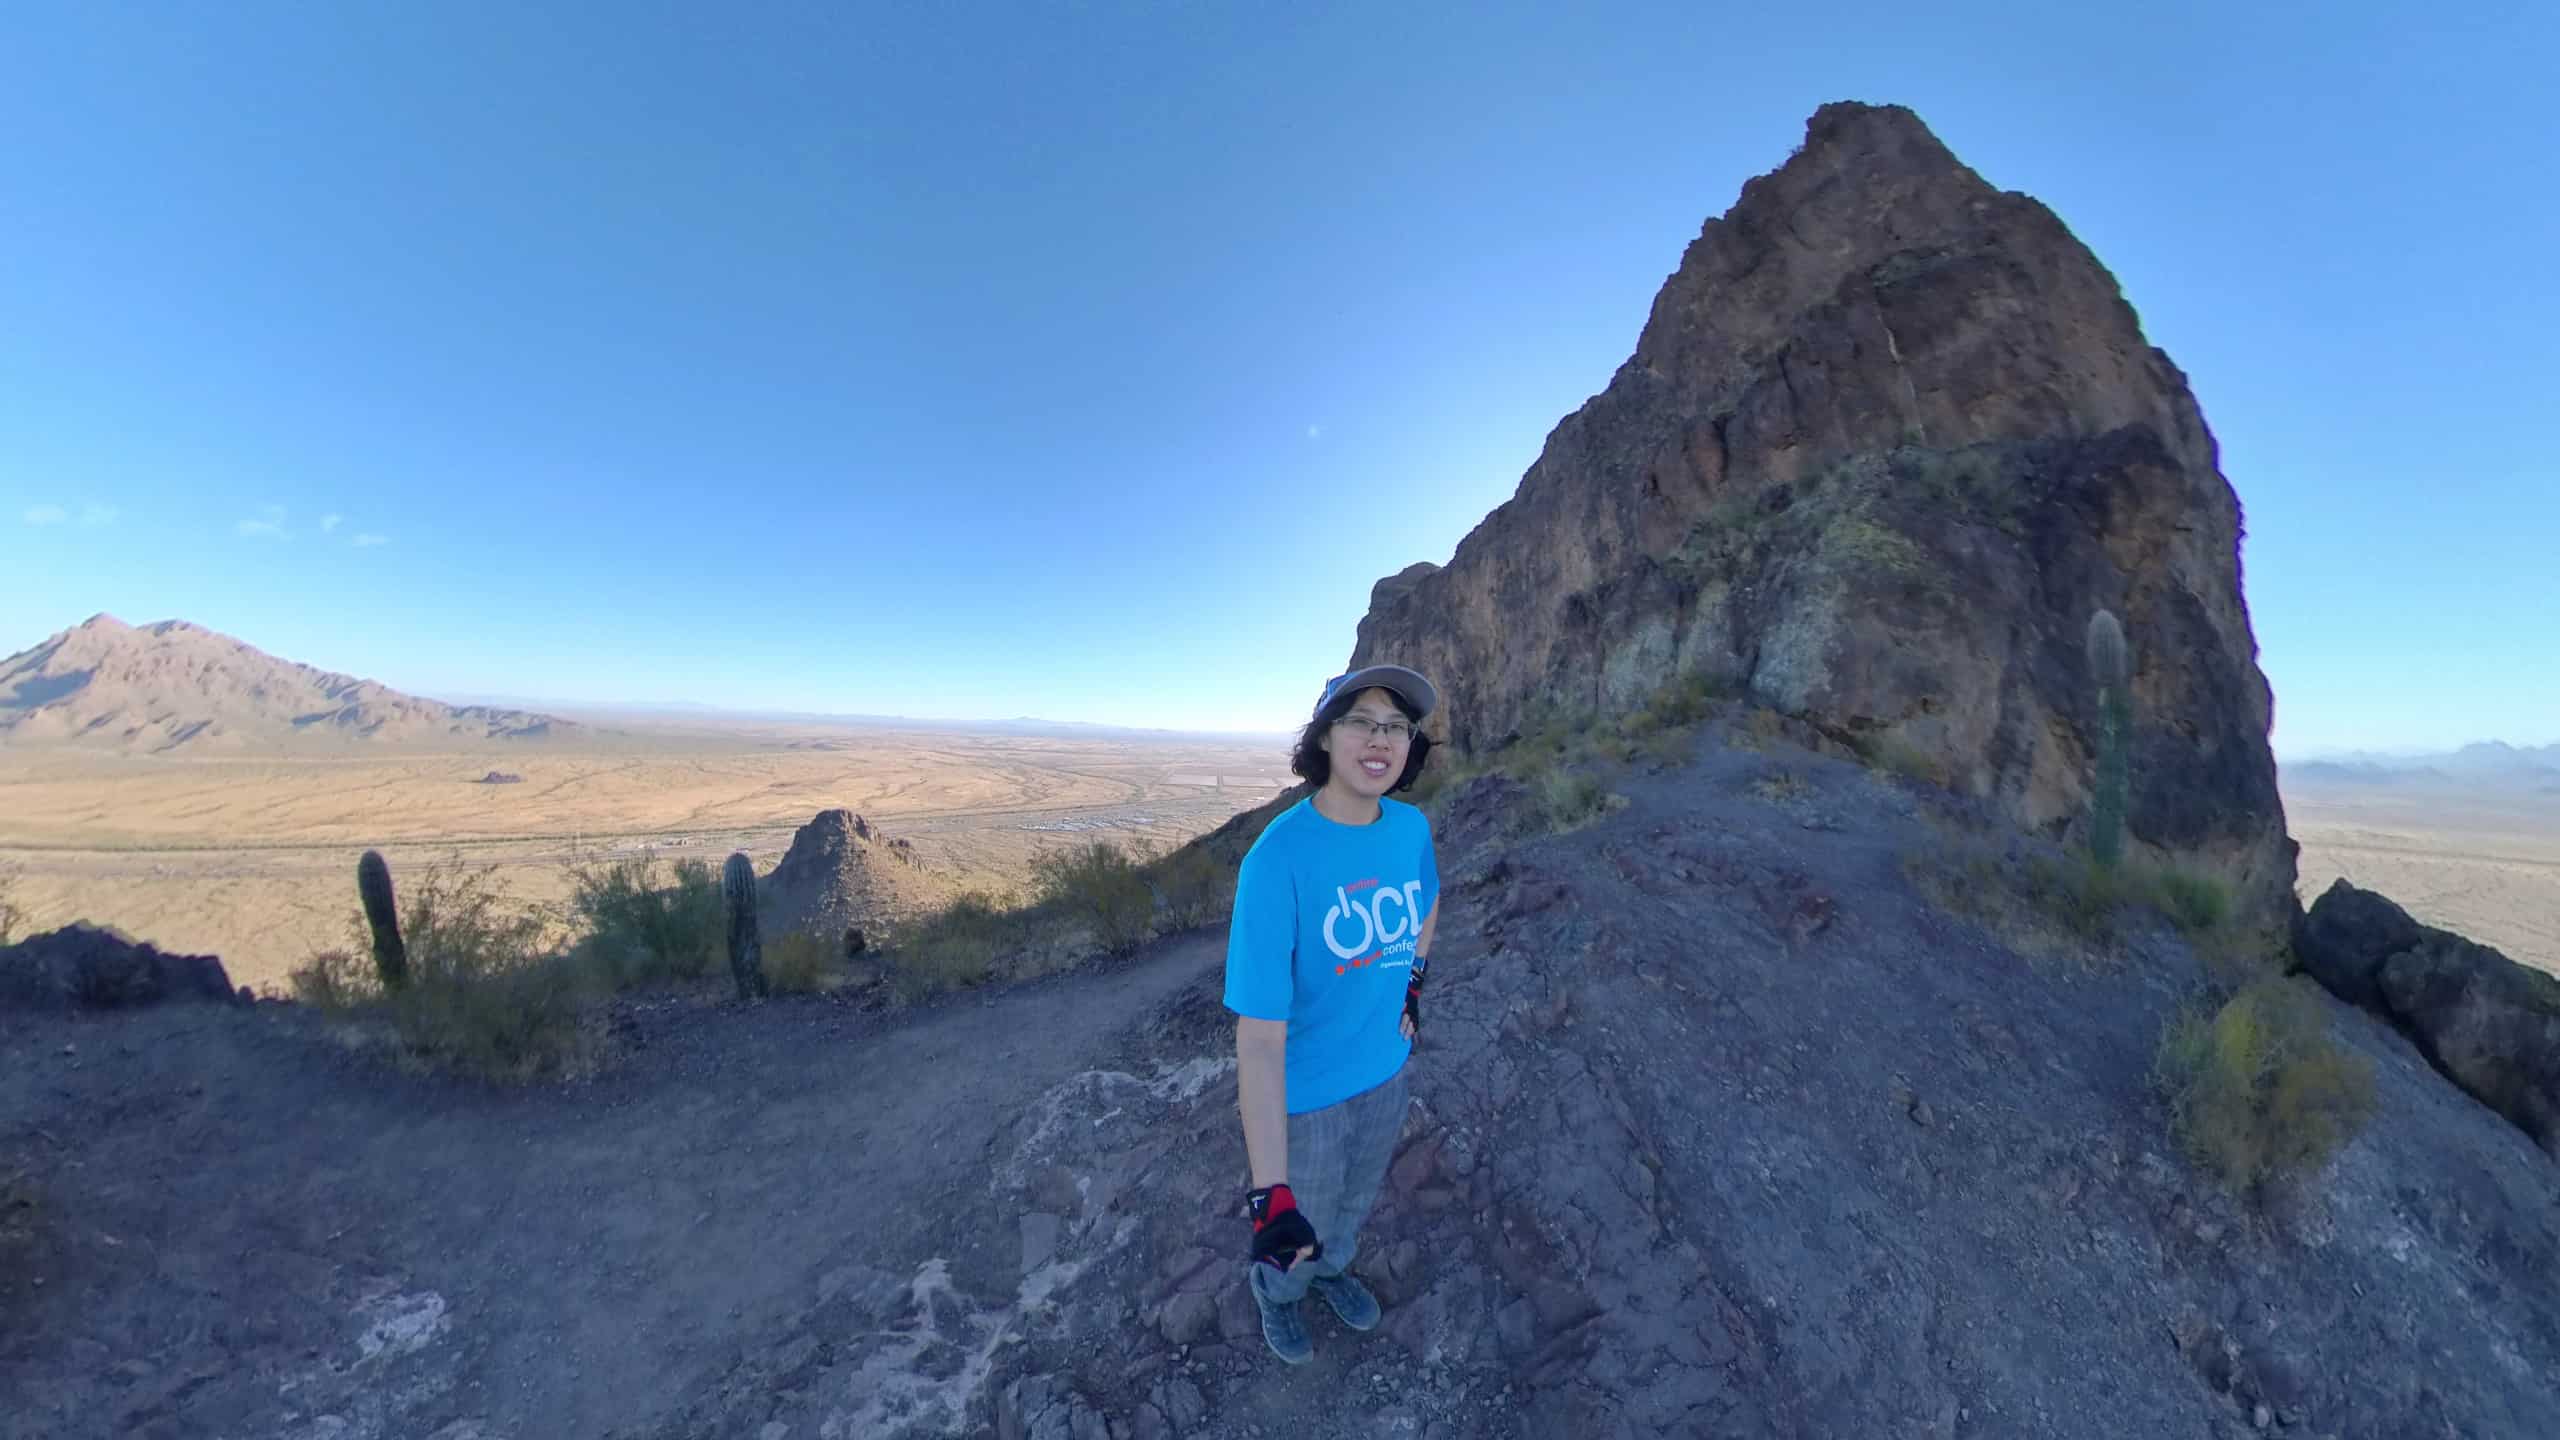 Meggie is wear a blue shirt that says "OCD" and has on red and black gloves. She is wearing a blue backpack and ballcap. She is in the shadows of a large brown mountain. She is on the saddle between the mountains. Behind her and the mountain is the vast brown desert and cactus and a clear blue sky. She is in Picacho Peak State Park between Tucson and Phoenix, Arizona, United States.